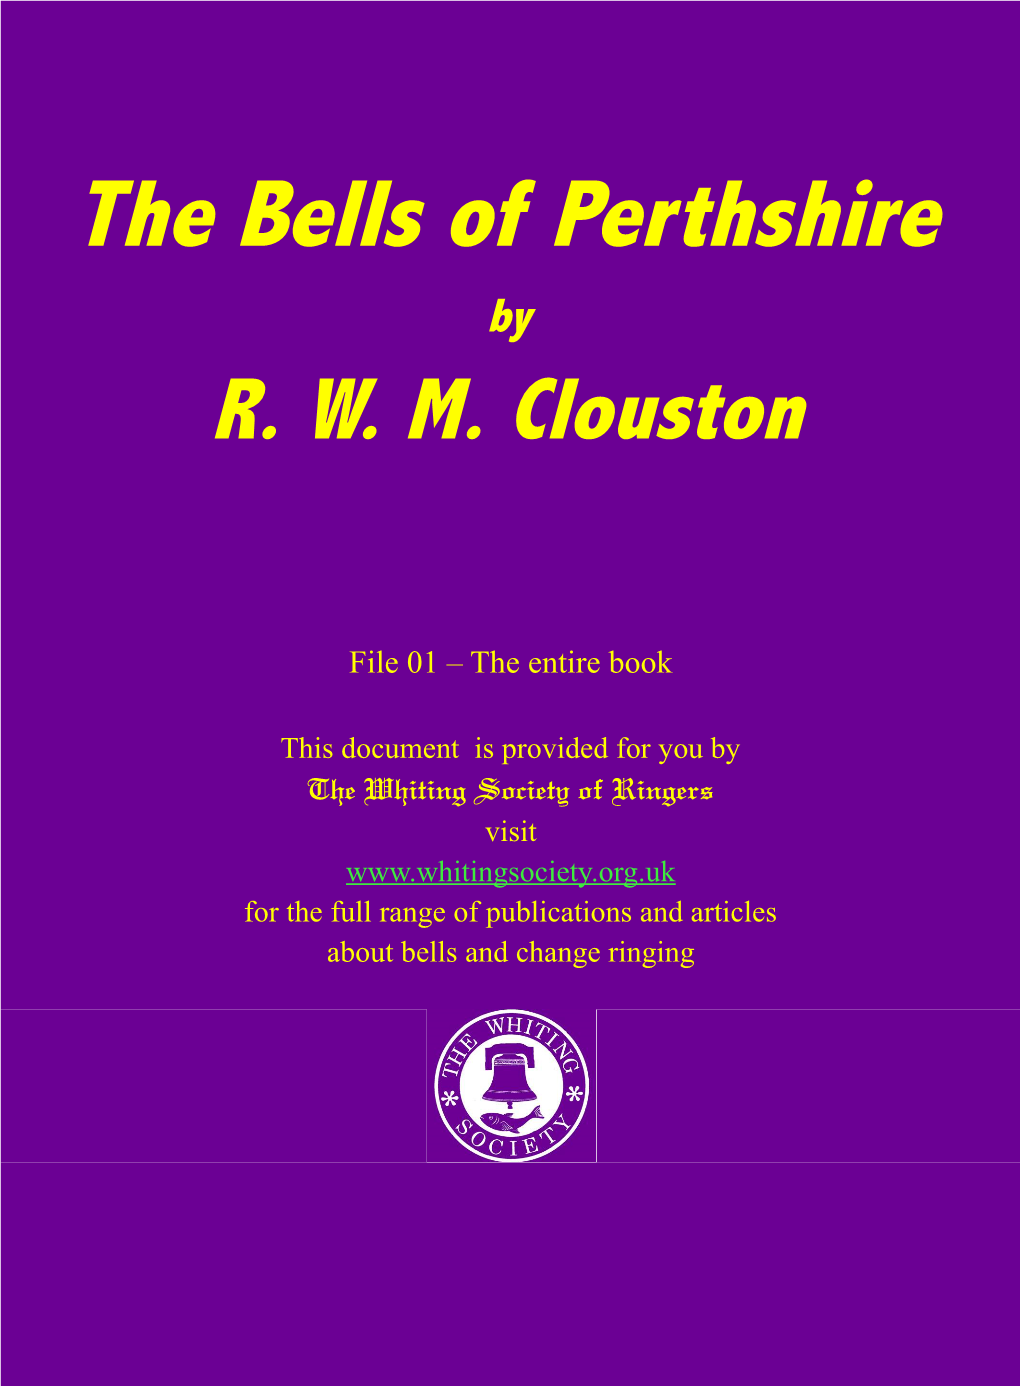 The Bells of Perthshire by R